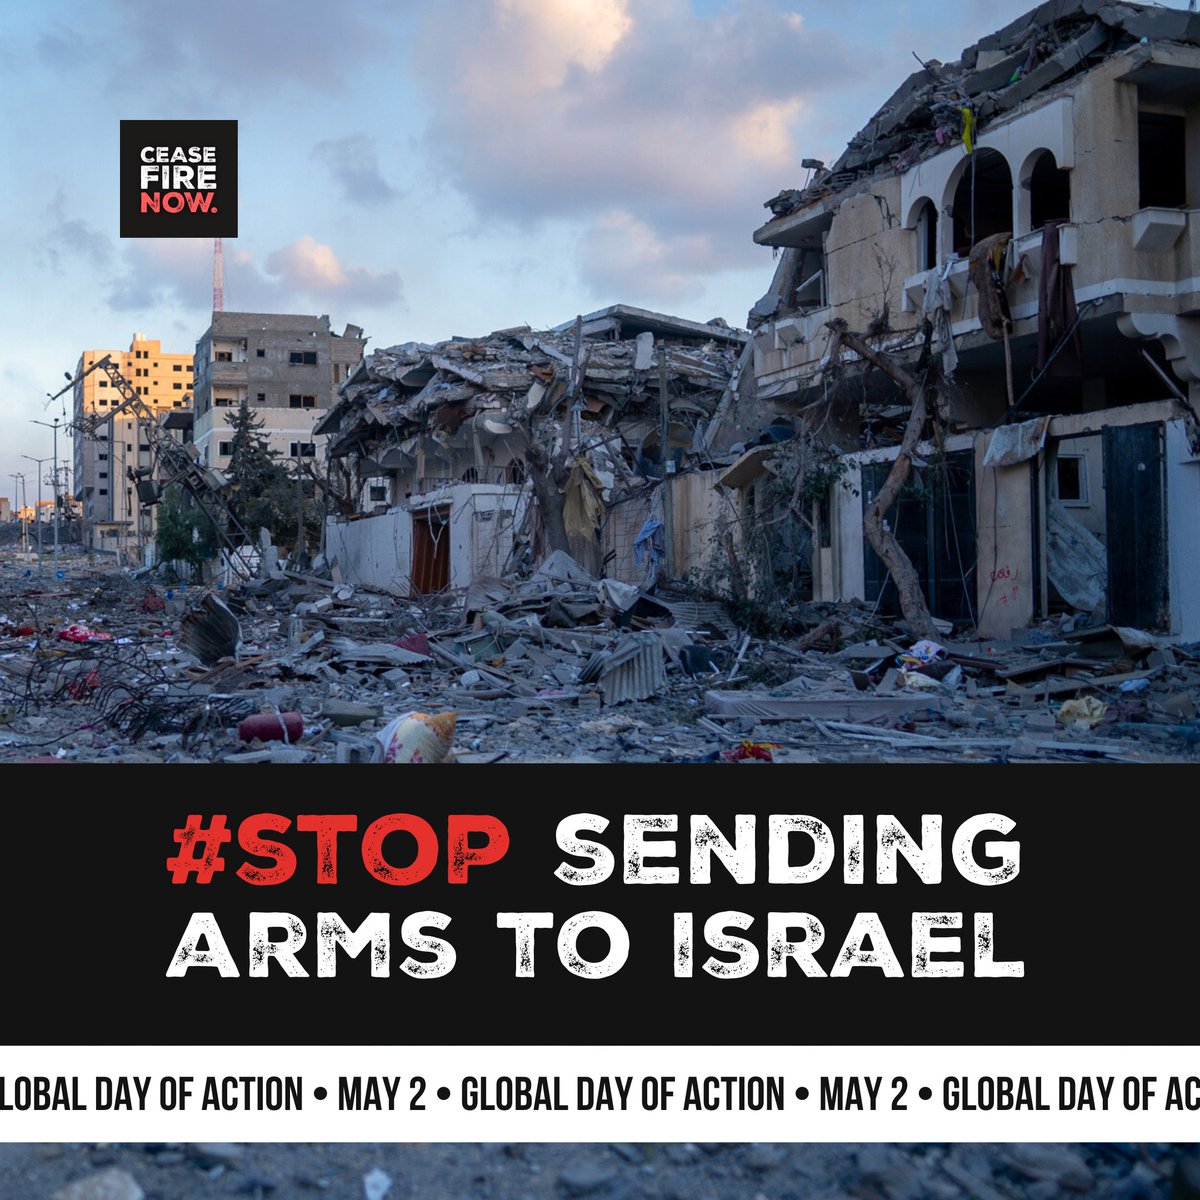 🚨 How many of your supplied arms were used to commit unlawful attacks killing Palestinians in Gaza? It’s time to #StopSendingArms. It’s time for a #CeasefireNOW!